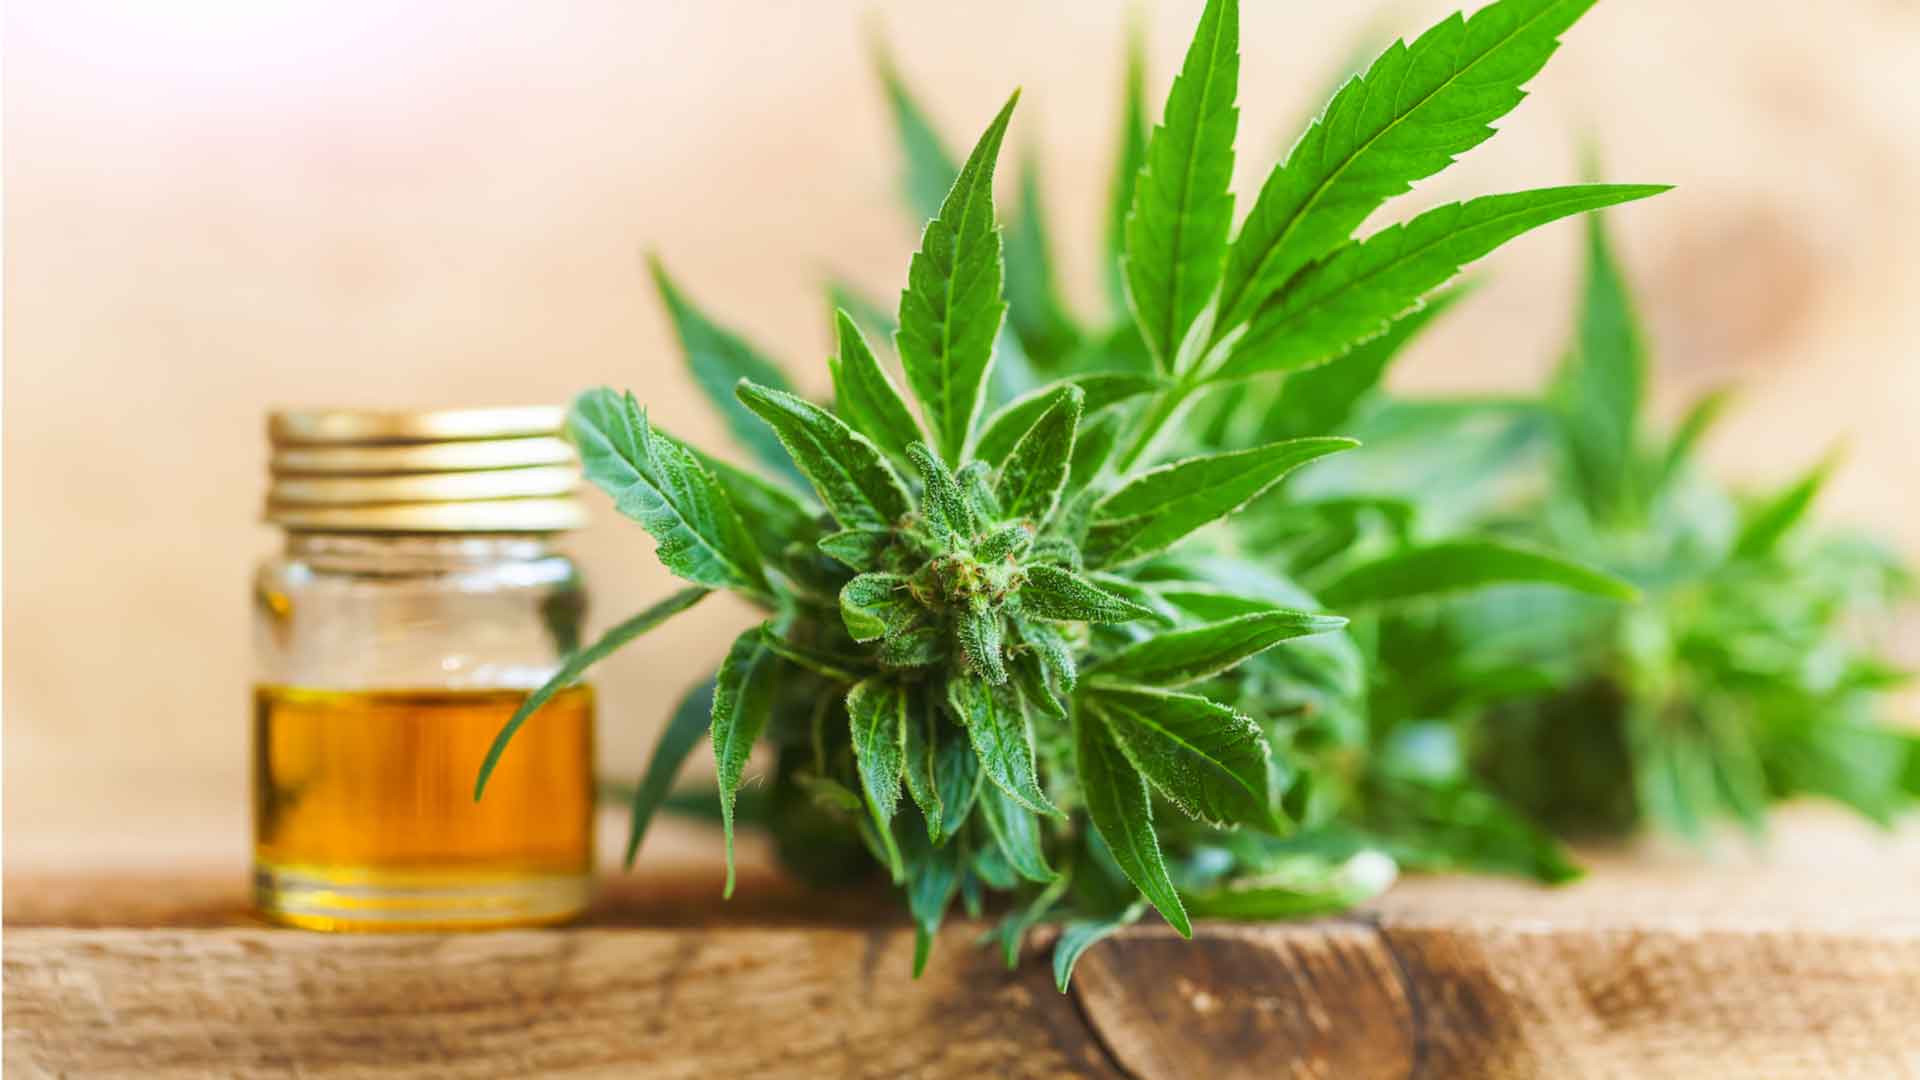 Know which is the most effective Cbd flower (Fleur de cbd) so that you can release tension